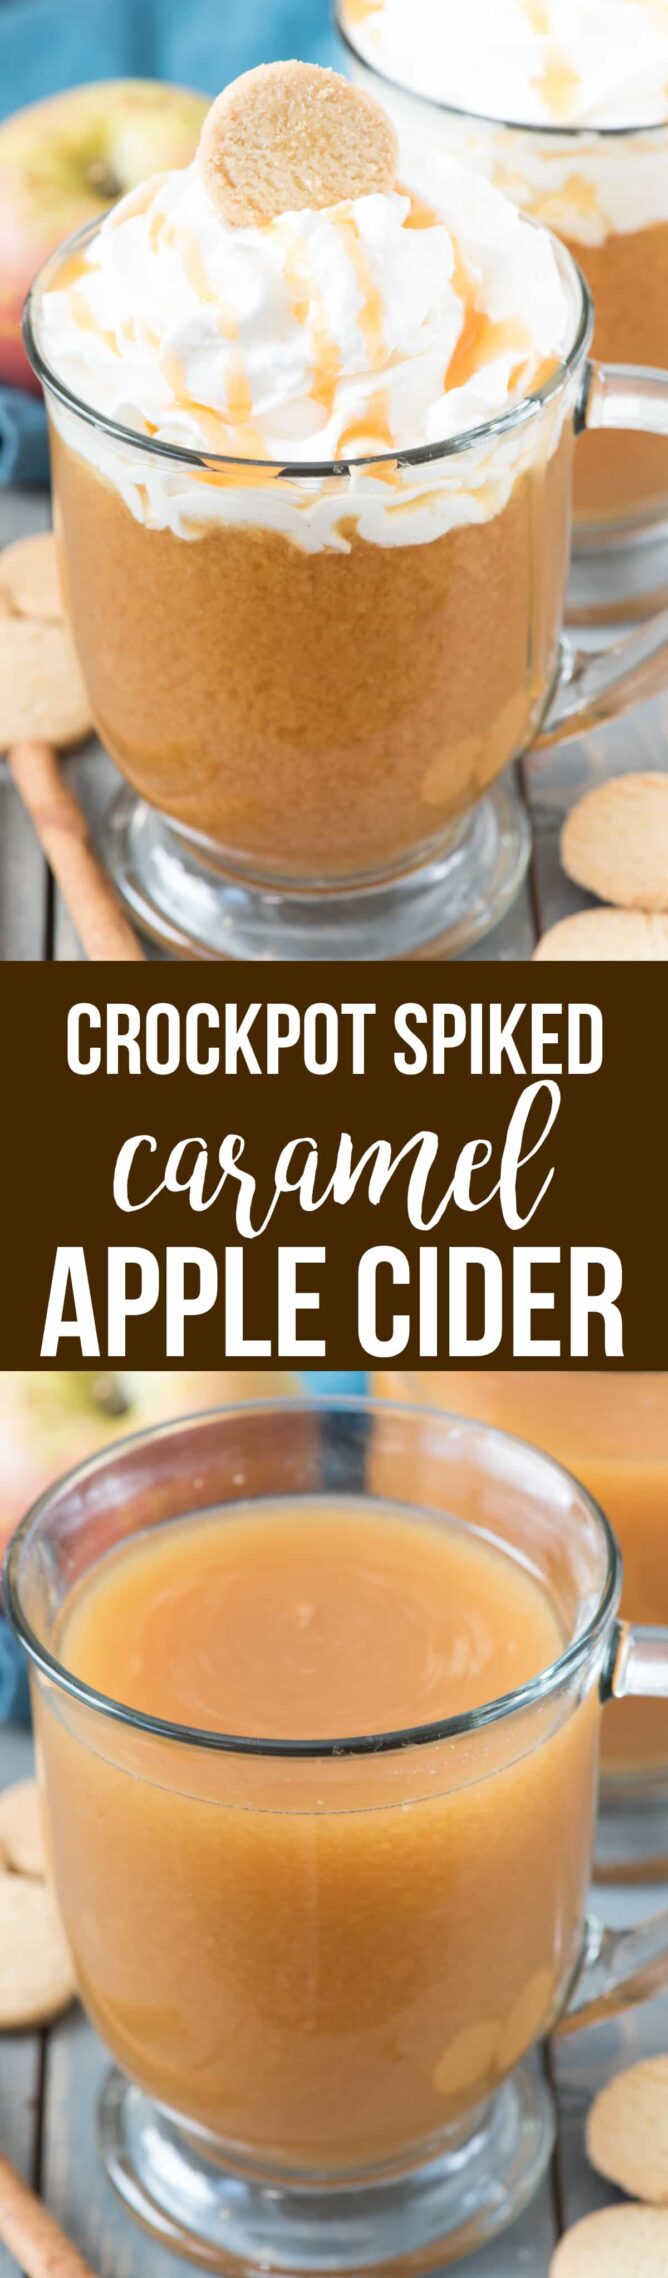 Spiked Crockpot Caramel Apple Cider - Make caramel apple cider in the slow cooker for a warm drink that is perfect for a crowd. Then spike it with vanilla vodka for the adults! This is everyone's favorite fall cocktail recipe.